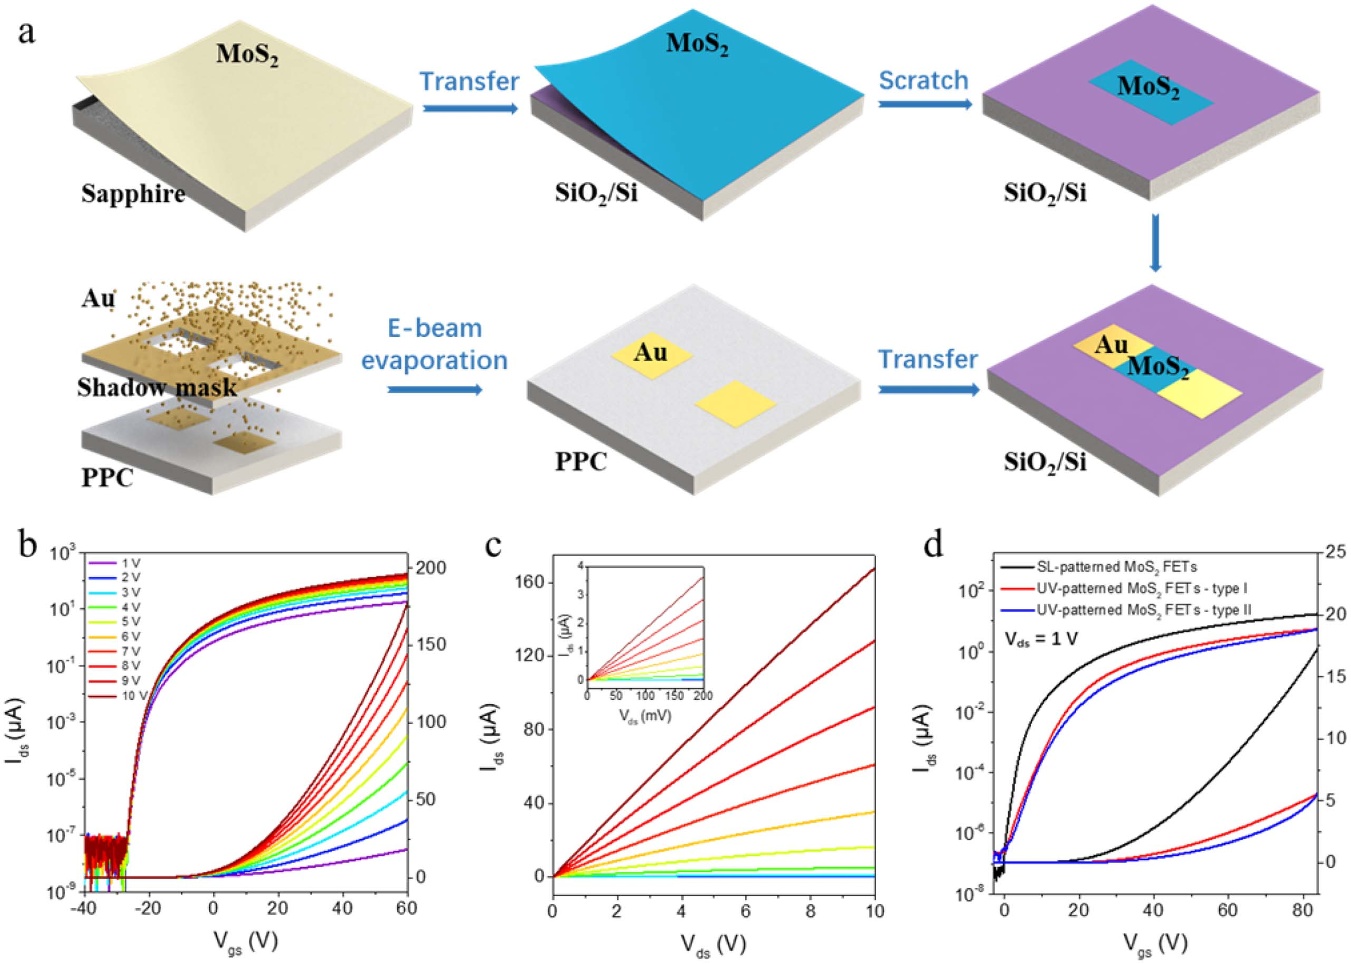 Scratching lithography for wafer-scale MoS₂ monolayers